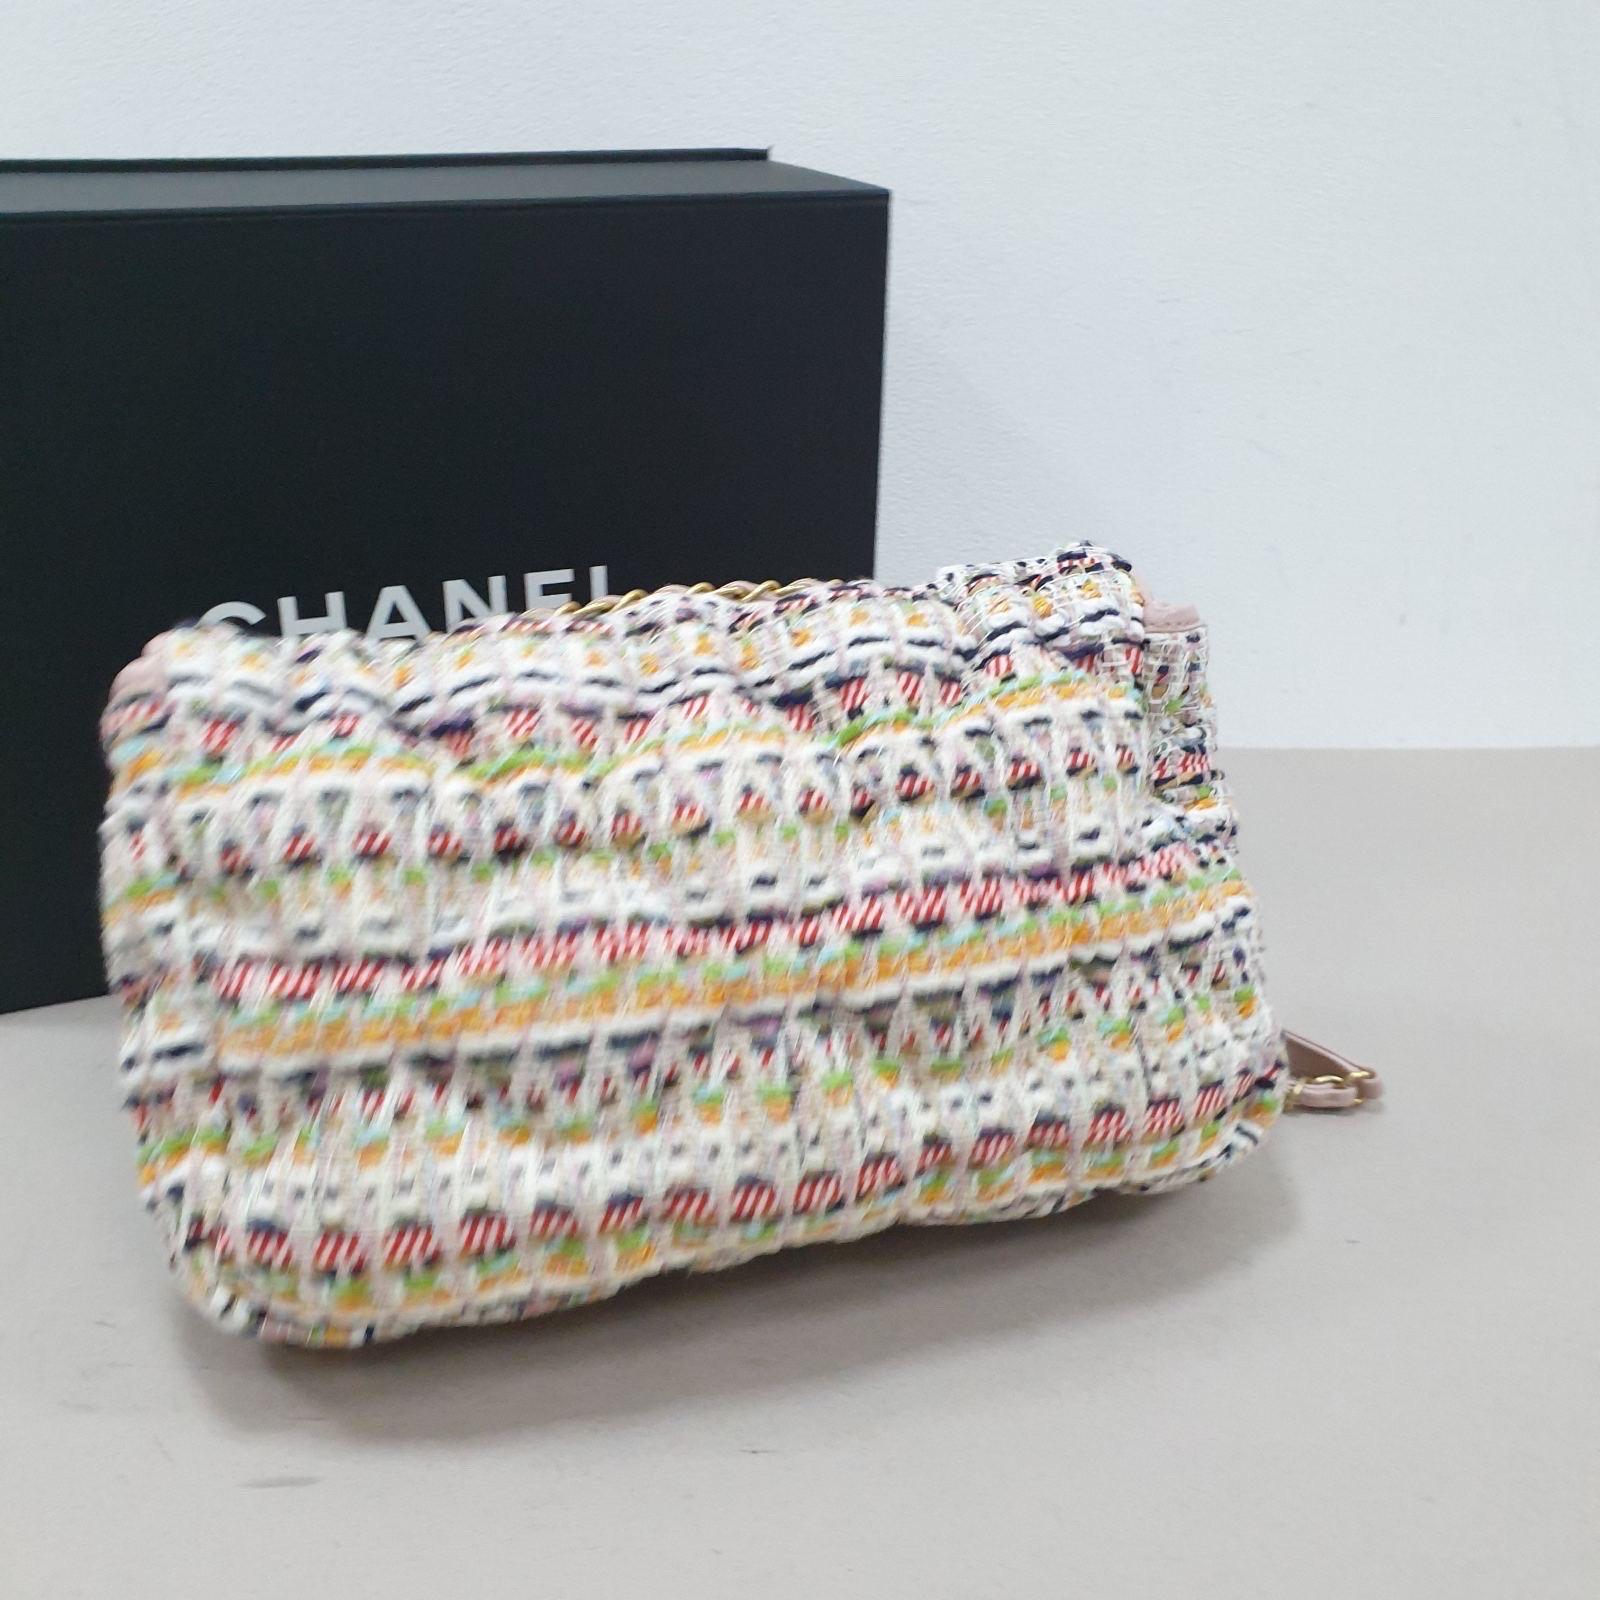 Chanel Coco Cuba Flap Quilted Tweed Bag For Sale 2